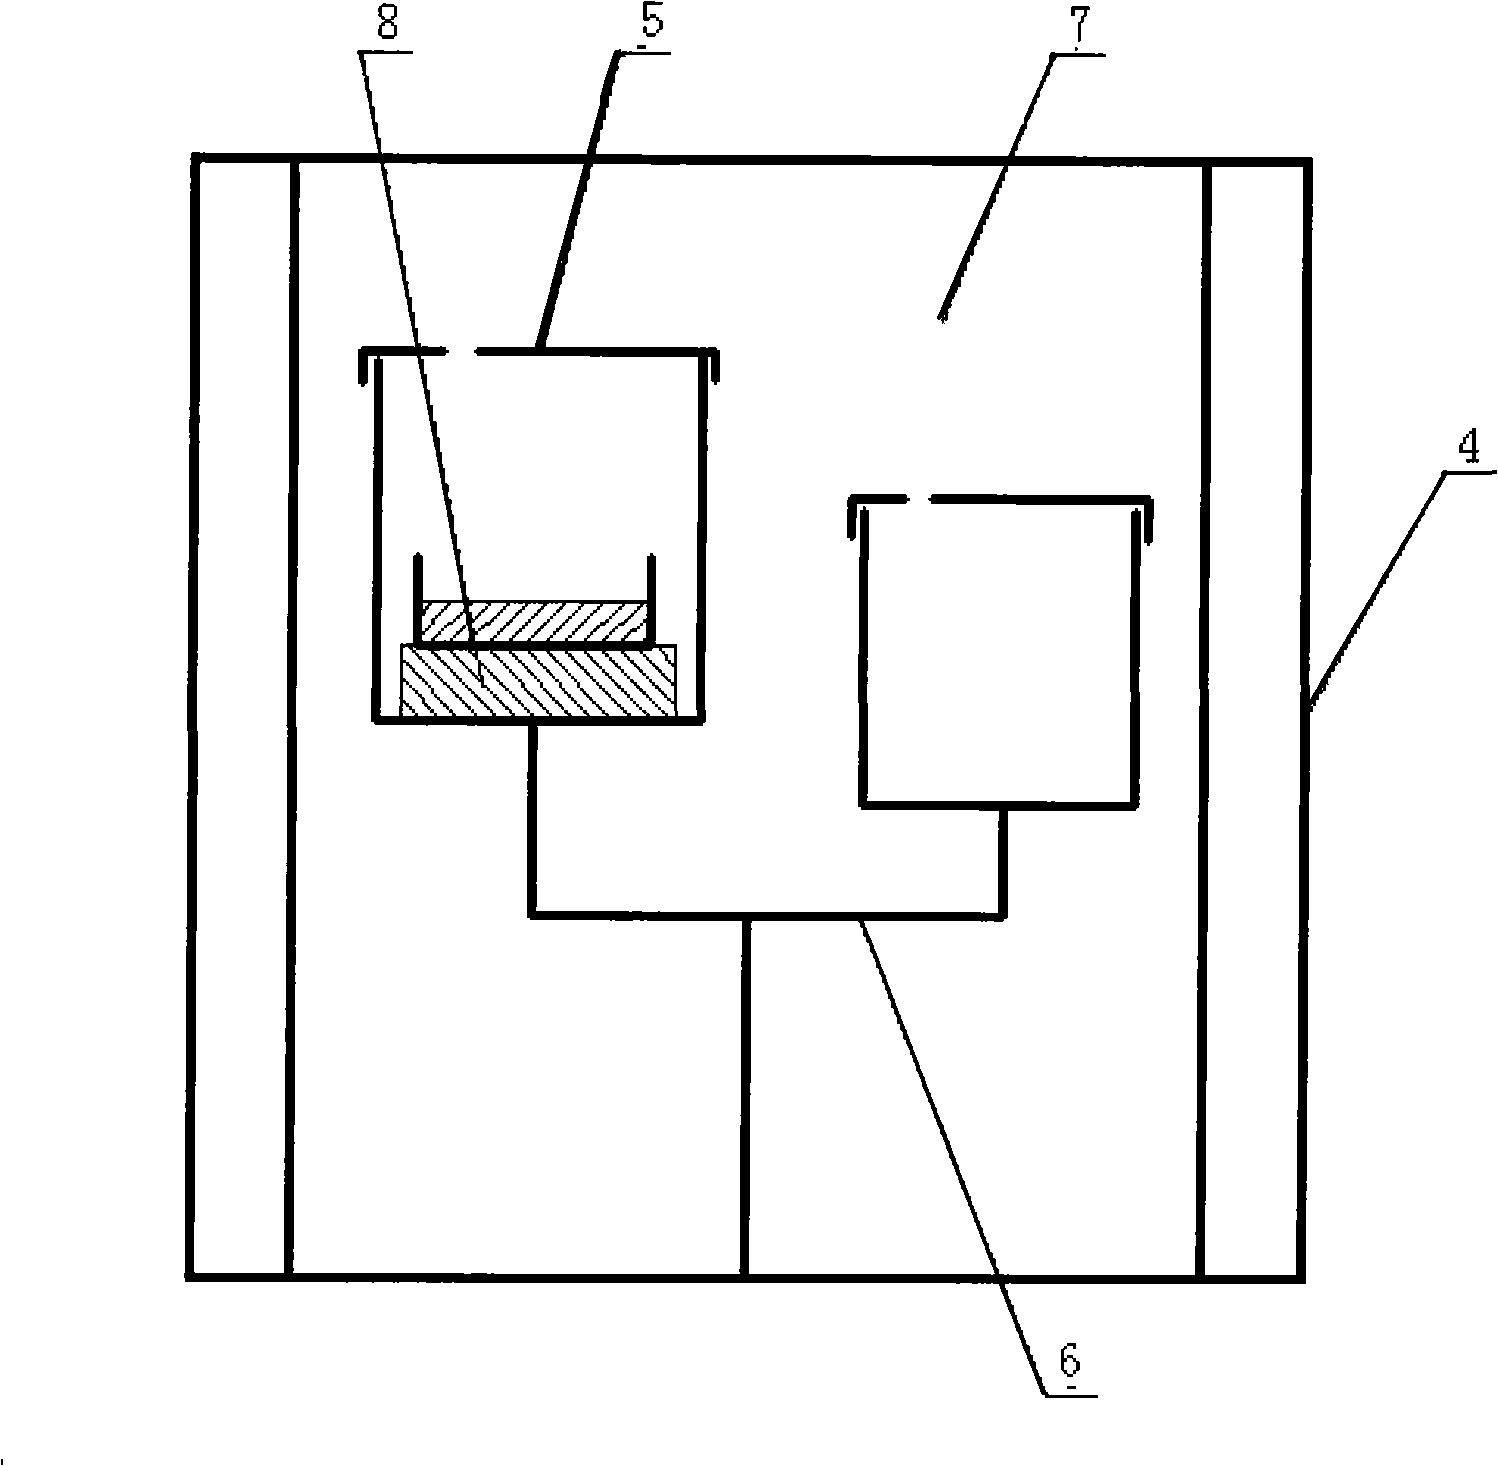 Process for determining thermoconductivity